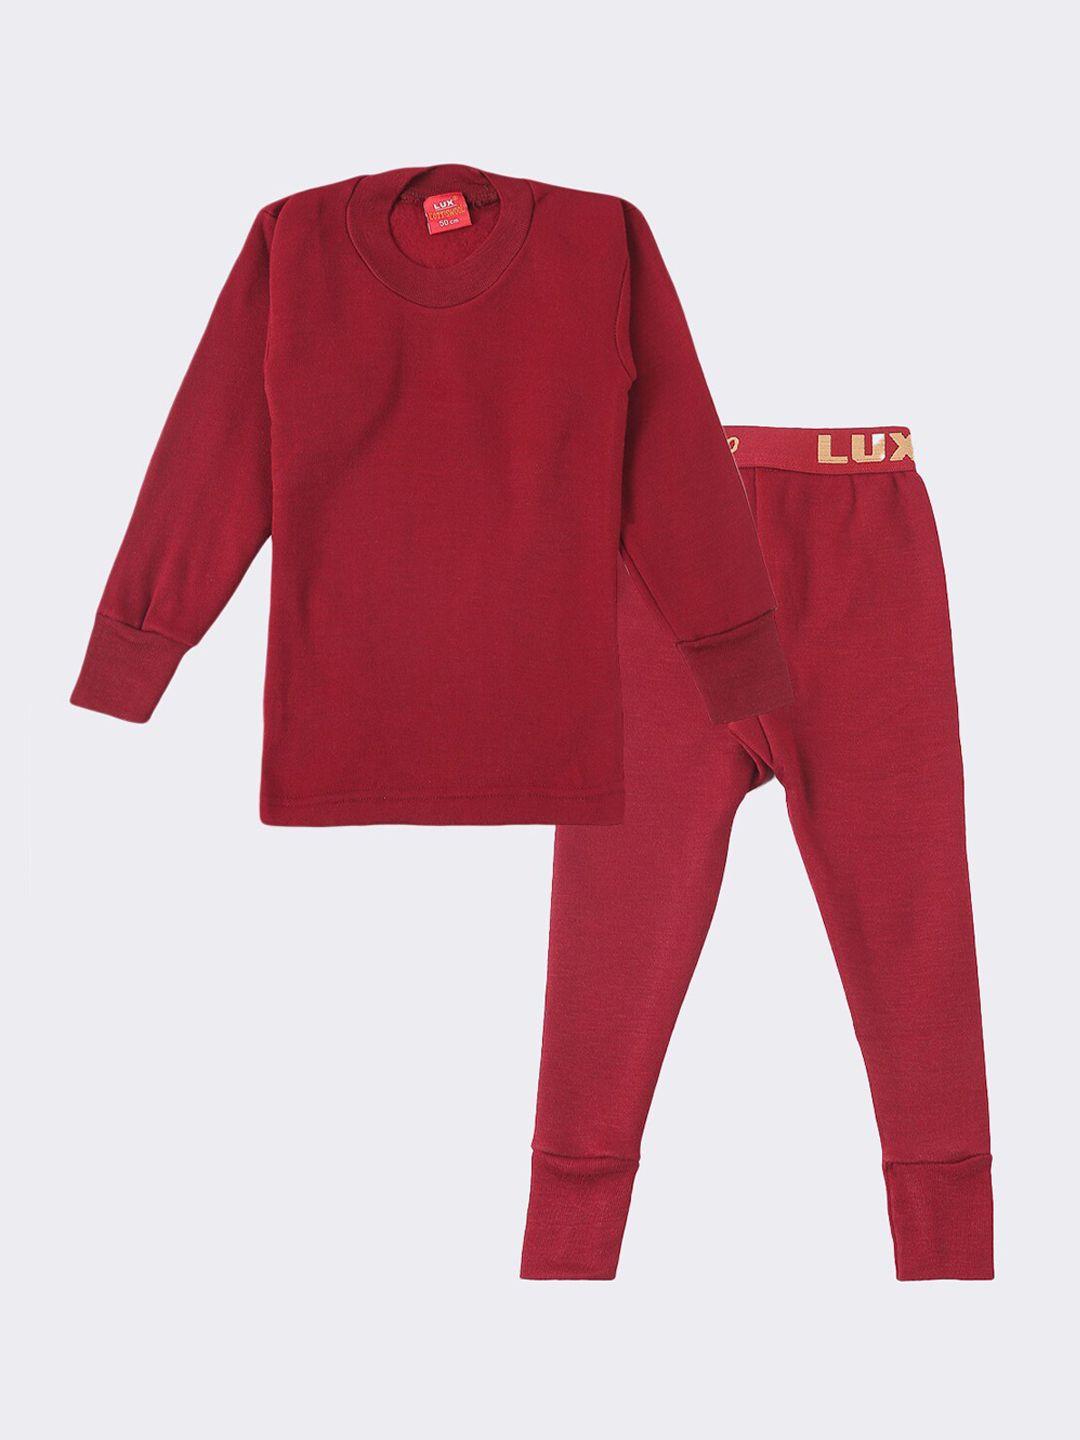 lux-cottswool-boys-maroon-red-solid-cotton-thermal-set